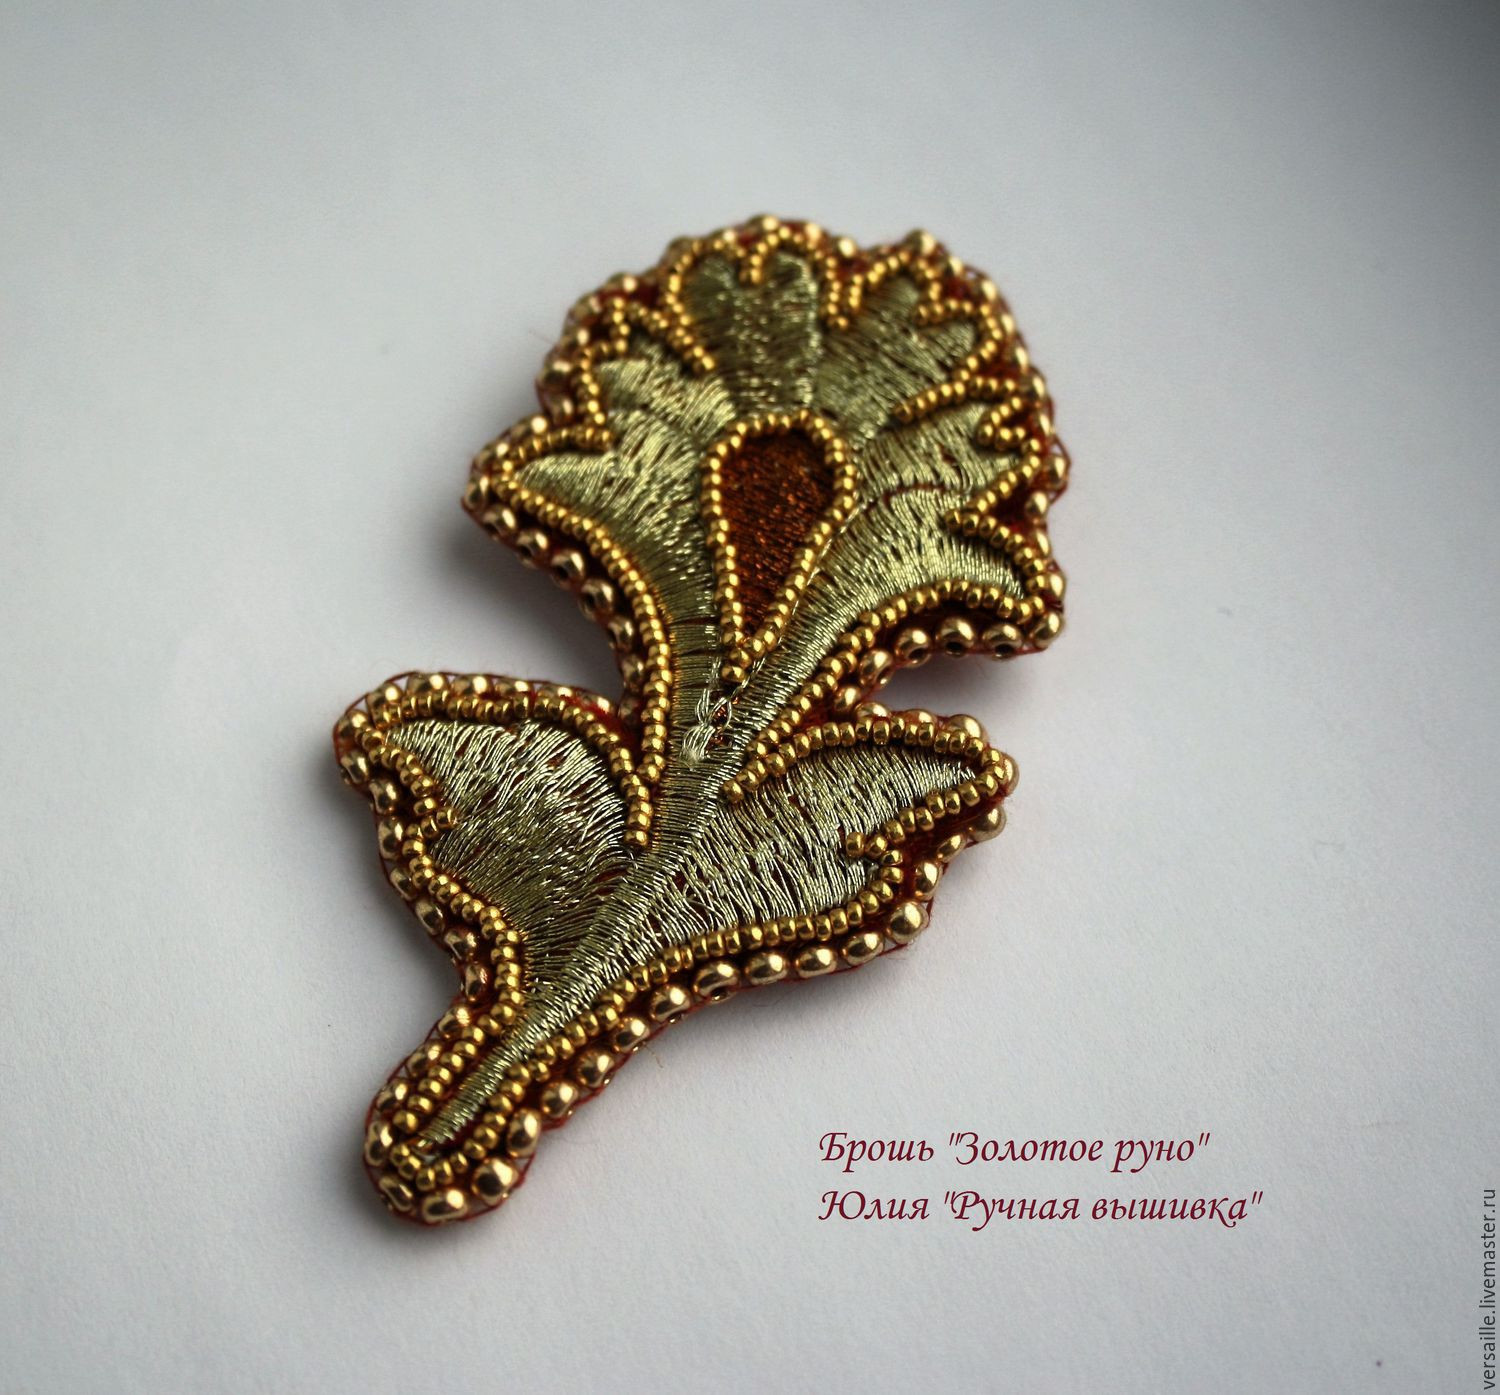 Brooches Embroidery
 Brooch with embroidery Brooch with beads "Golden fleece